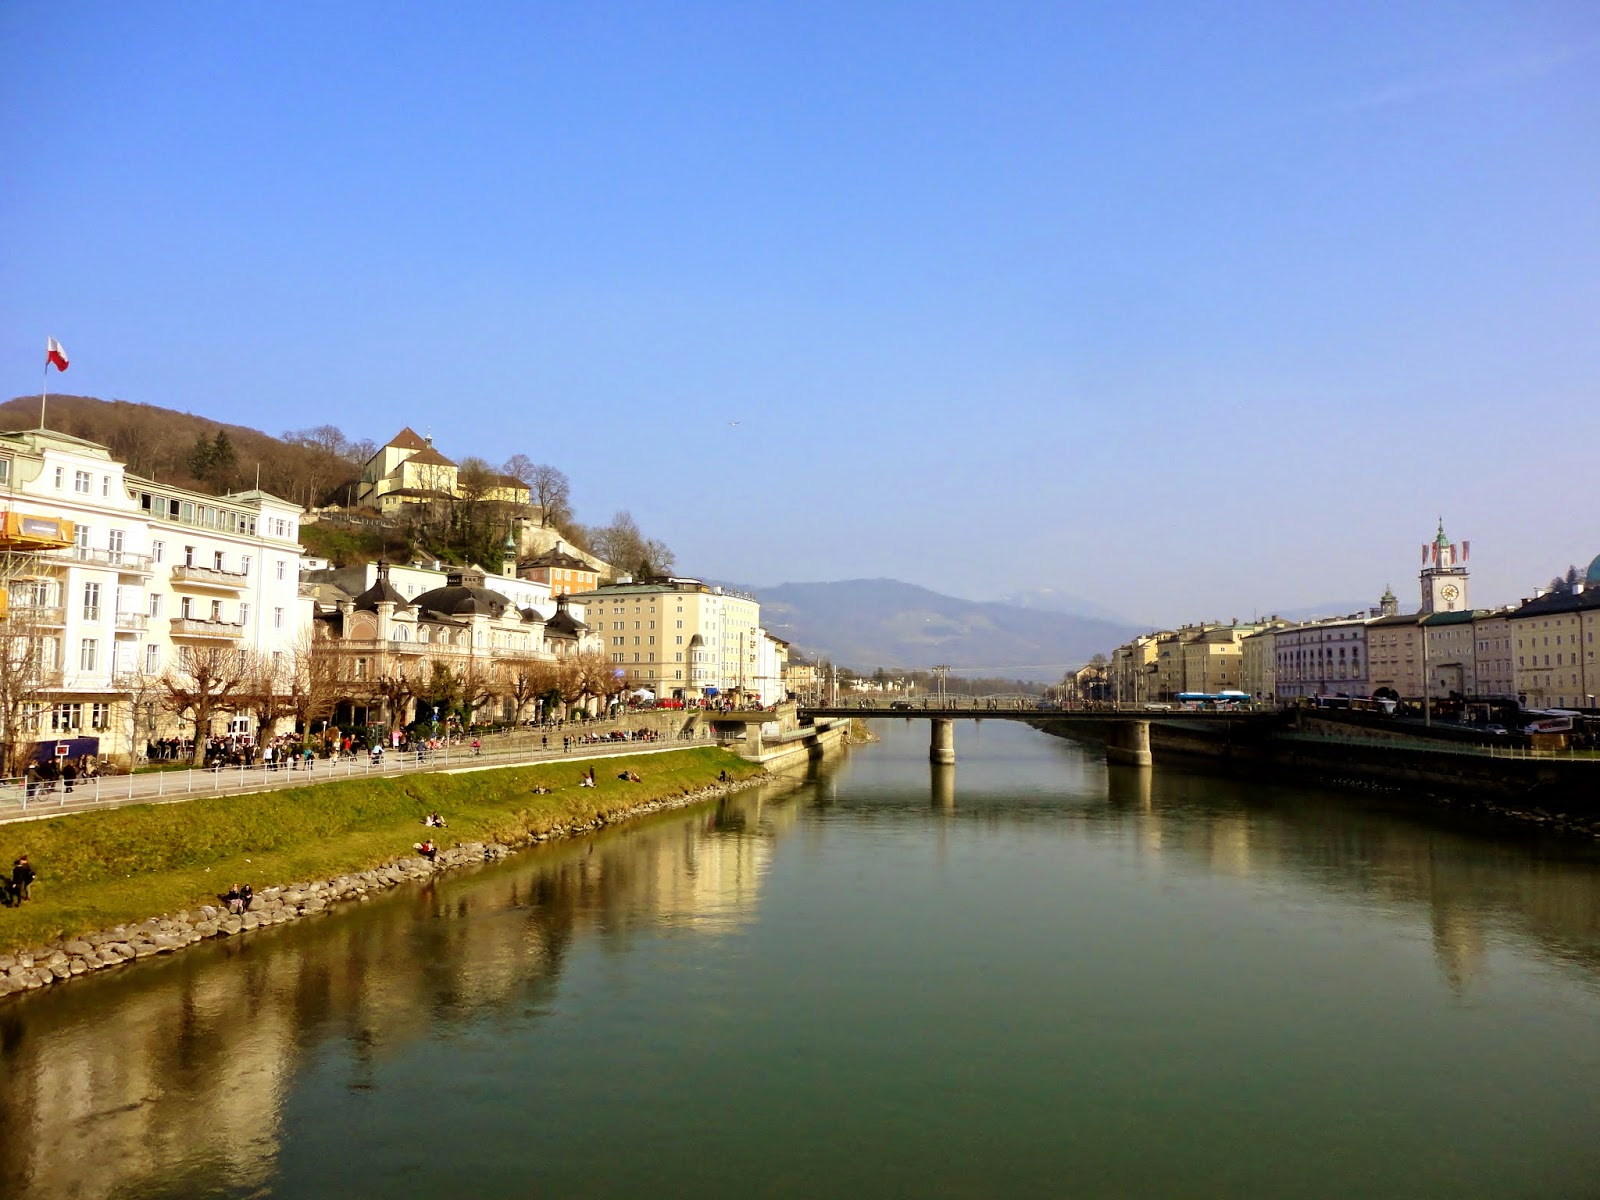 View over the river in Salzburg, Austria